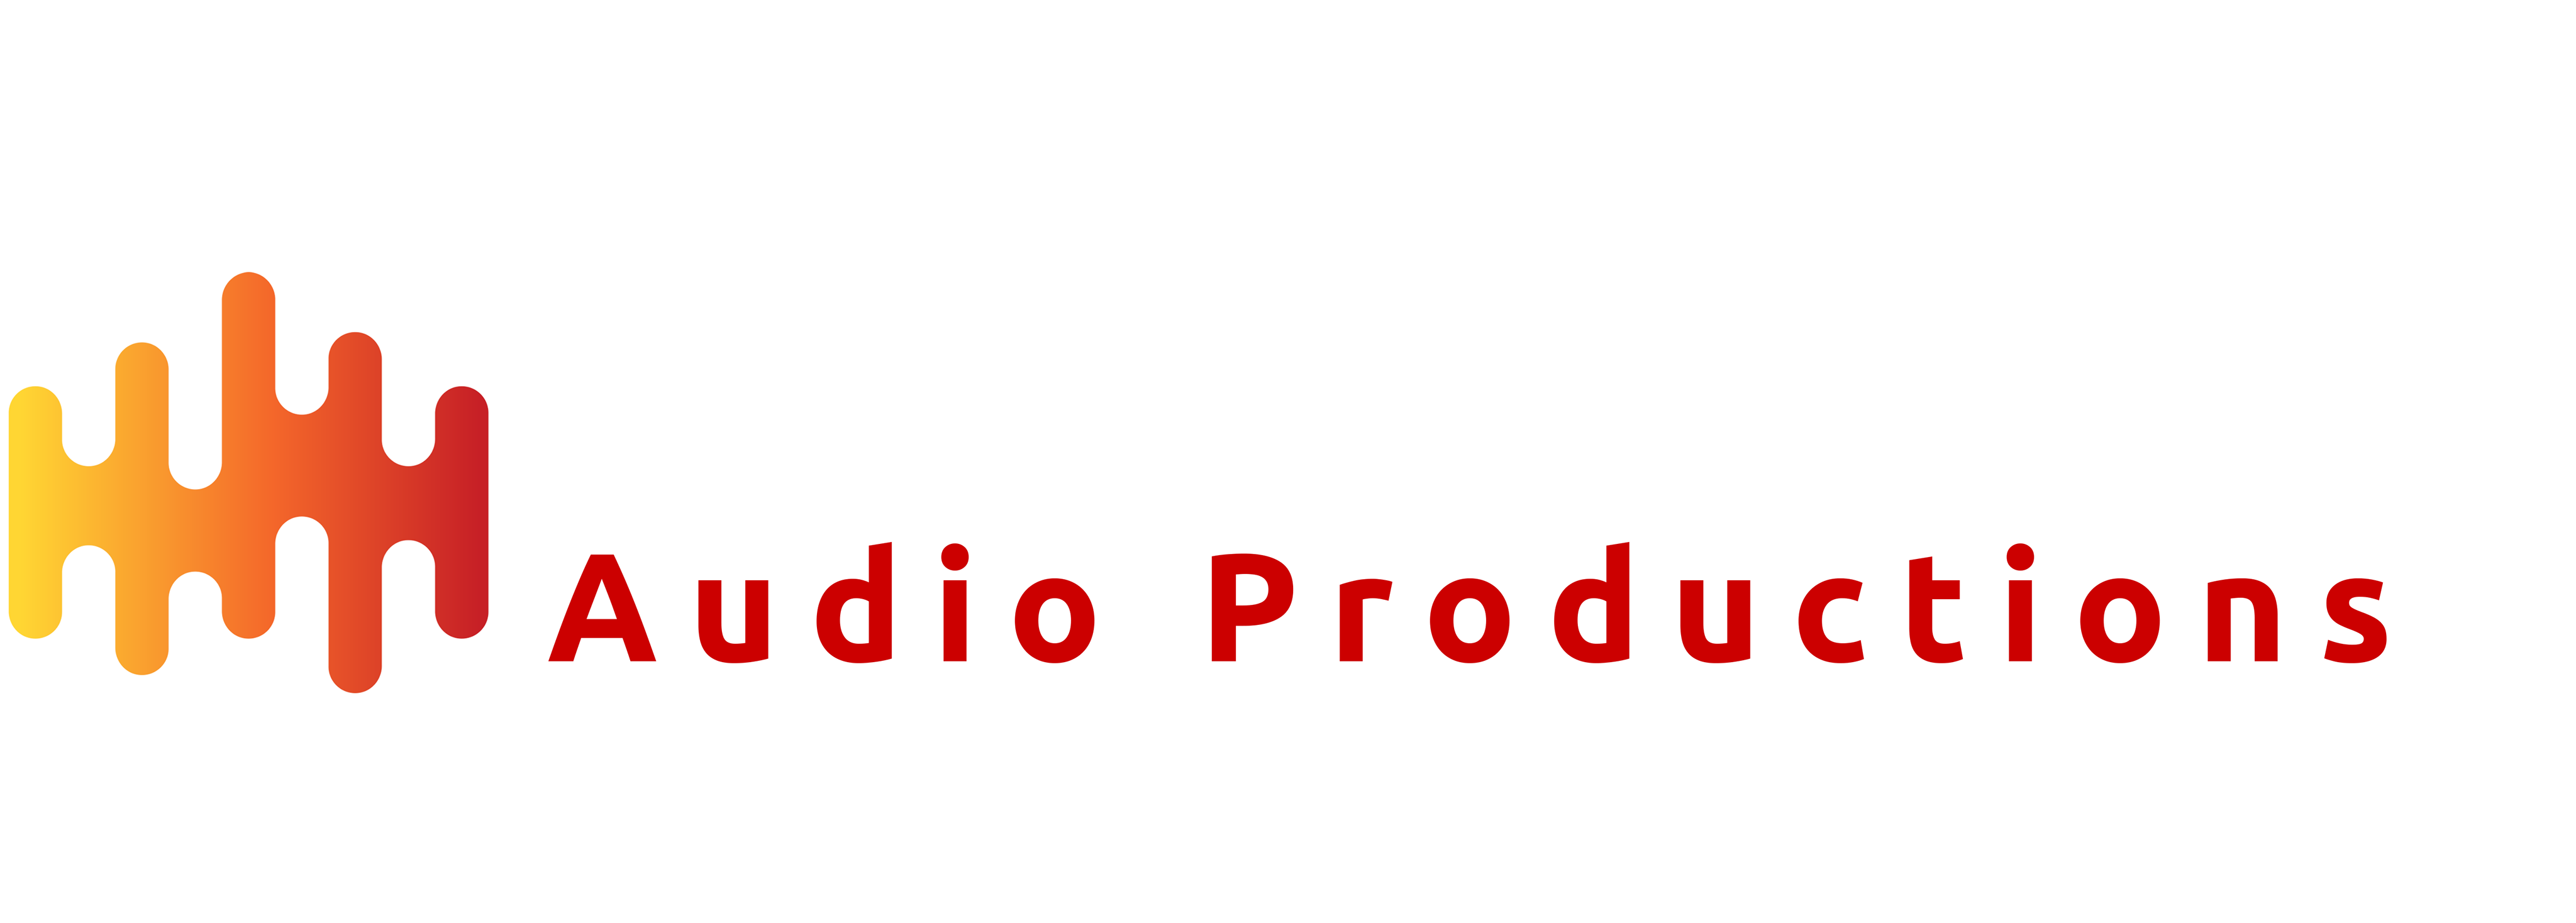 Red Room Sound